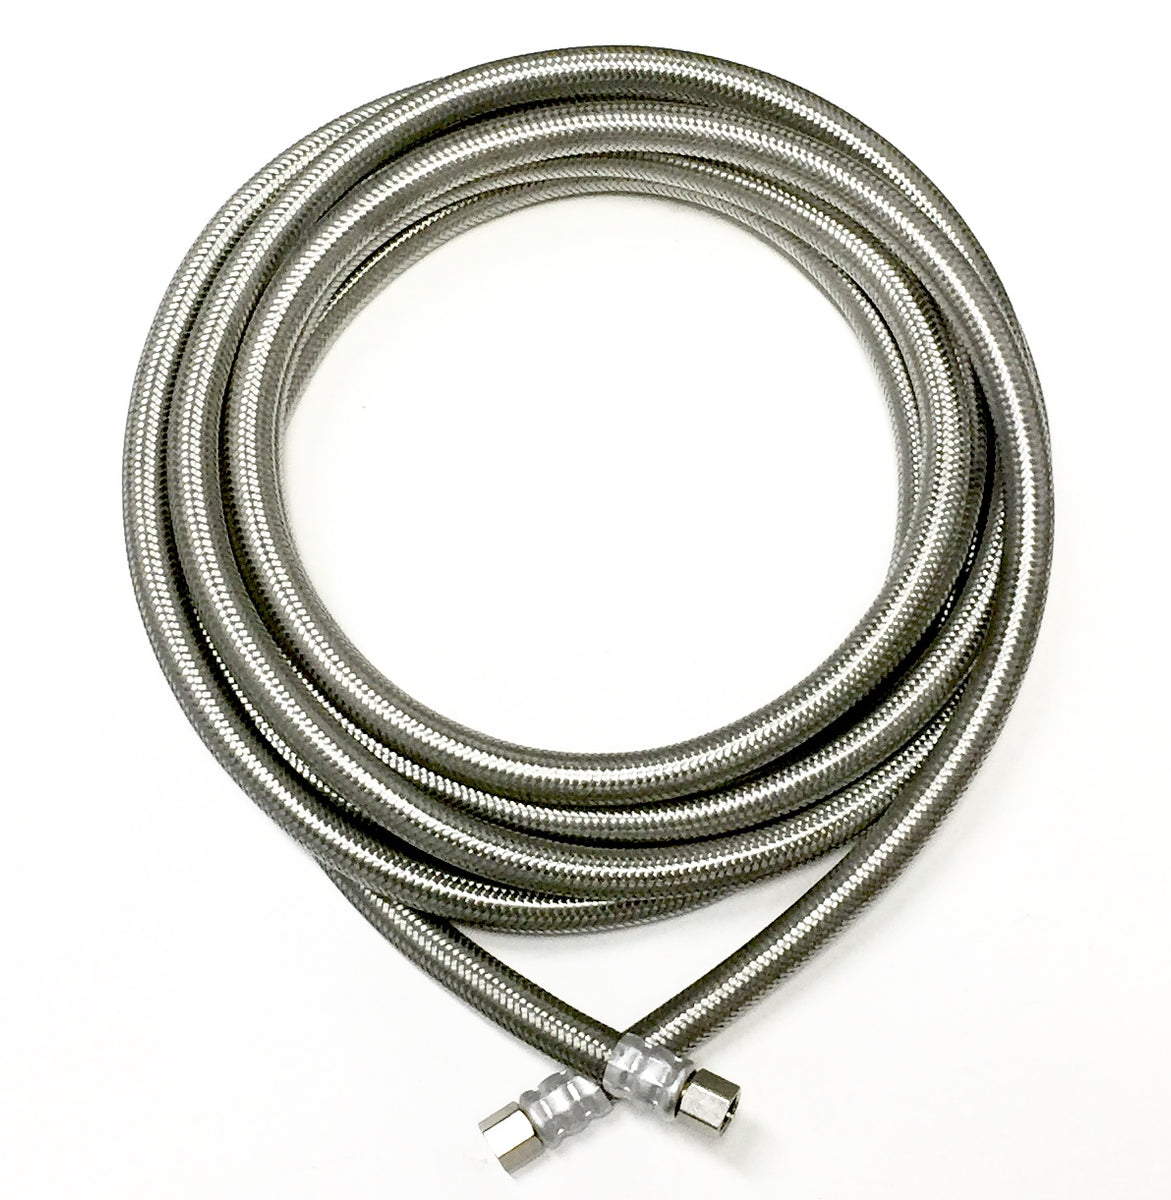 Ice Maker Water Line Stainless 7' Hose